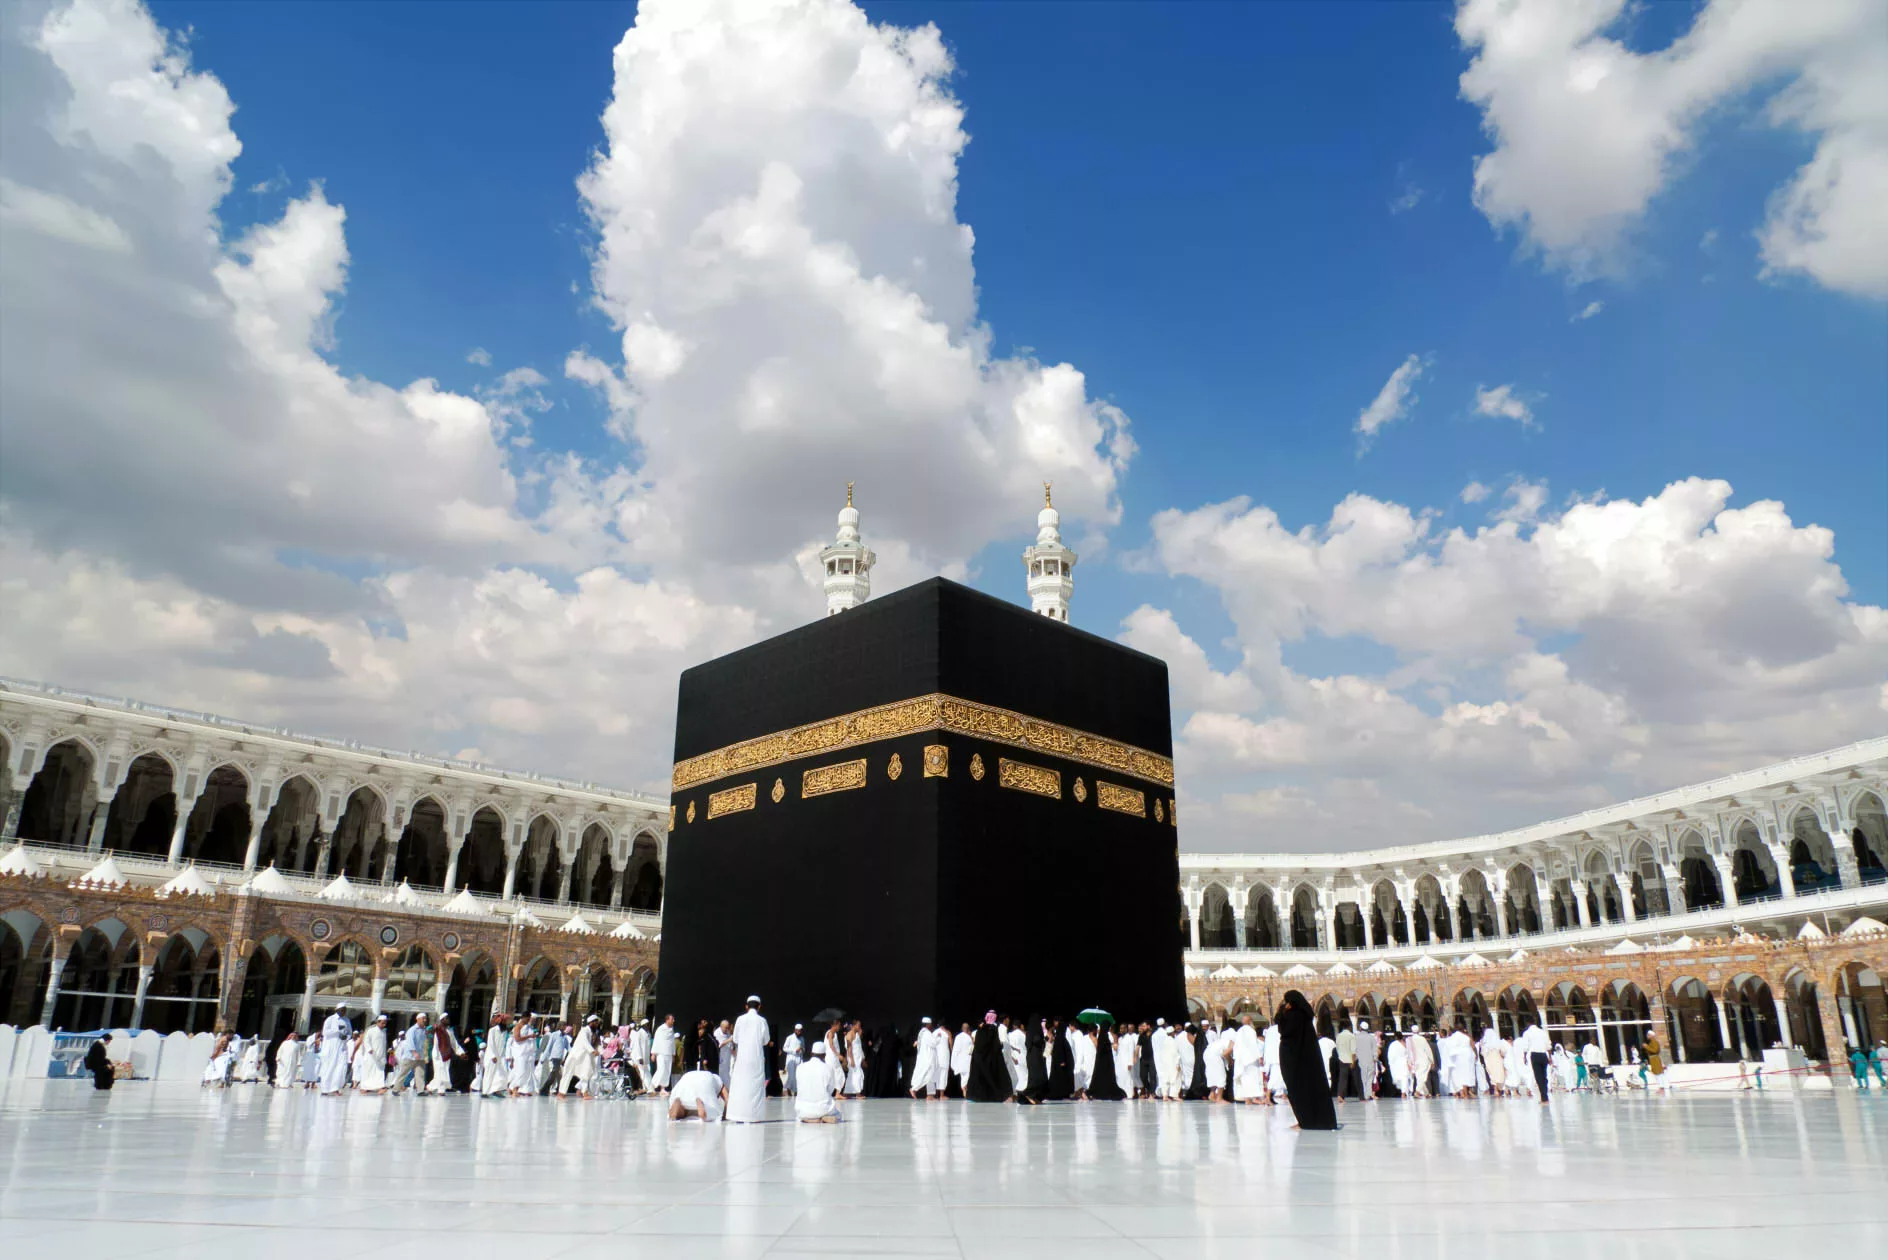 Religious tourism, in Saudi Arabia, contributes to 20% of the country's GDP and is a critical global tourist destination.